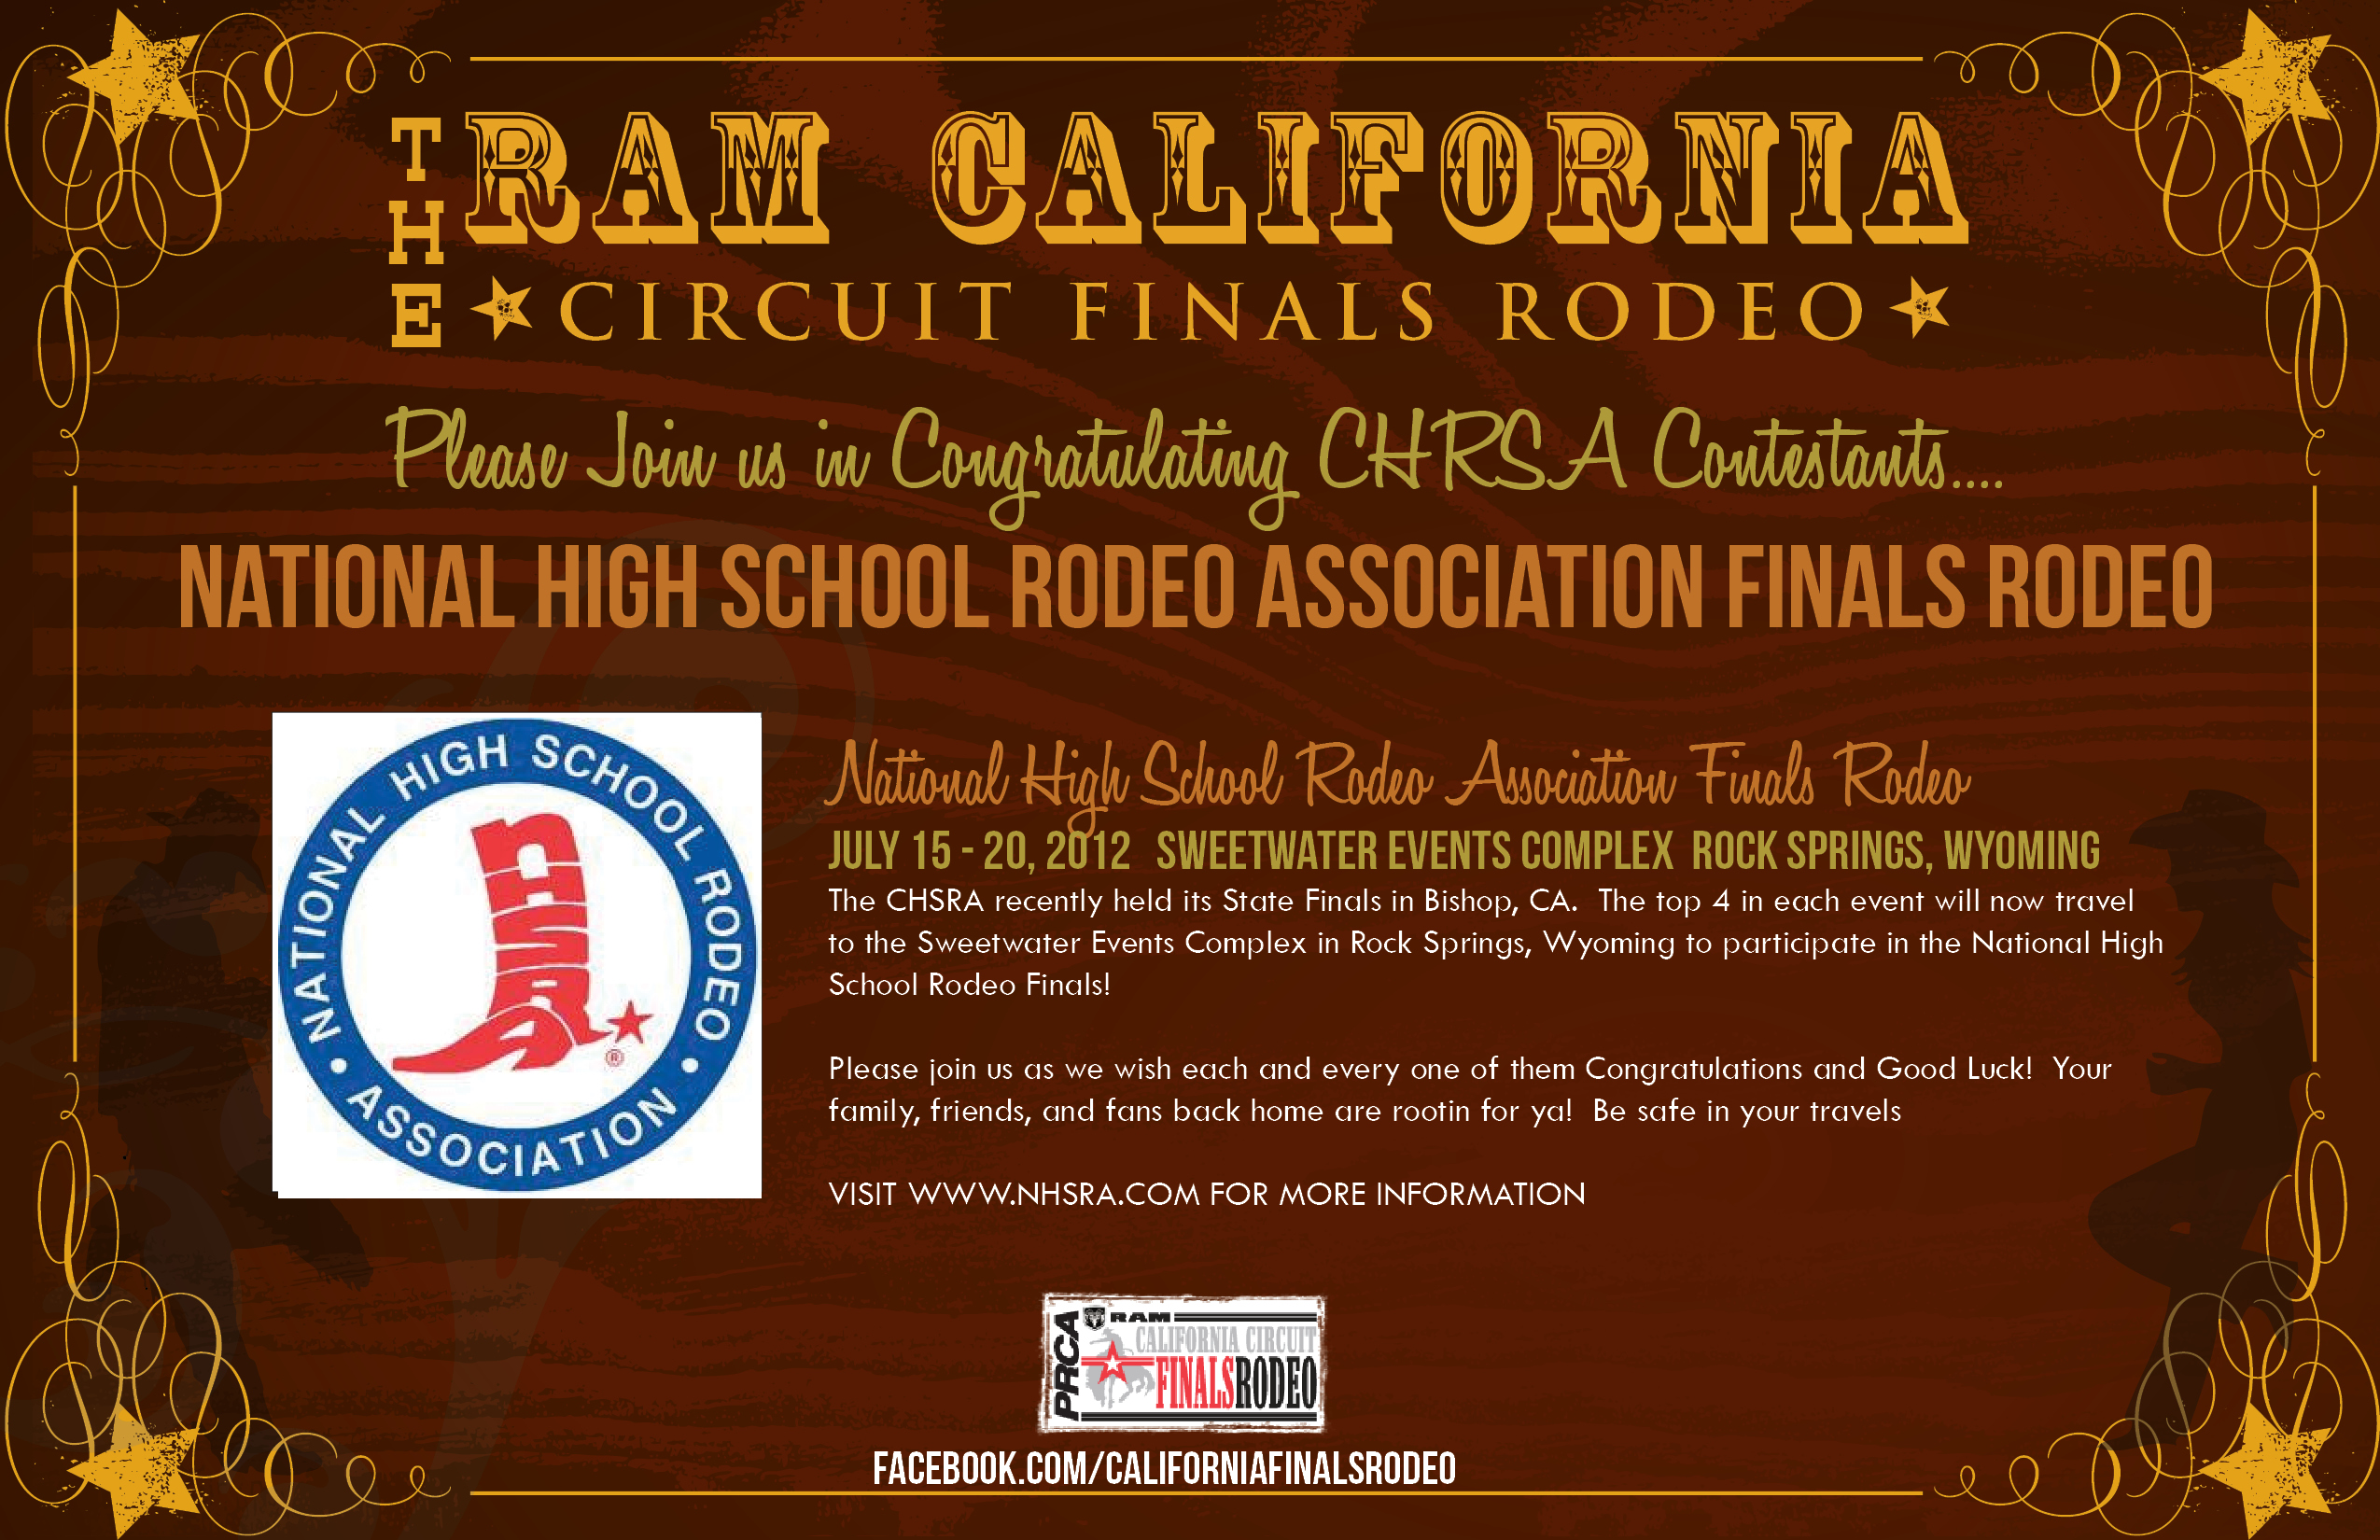 CHSRA Top Qualifiers are off to the National High School Rodeo Finals